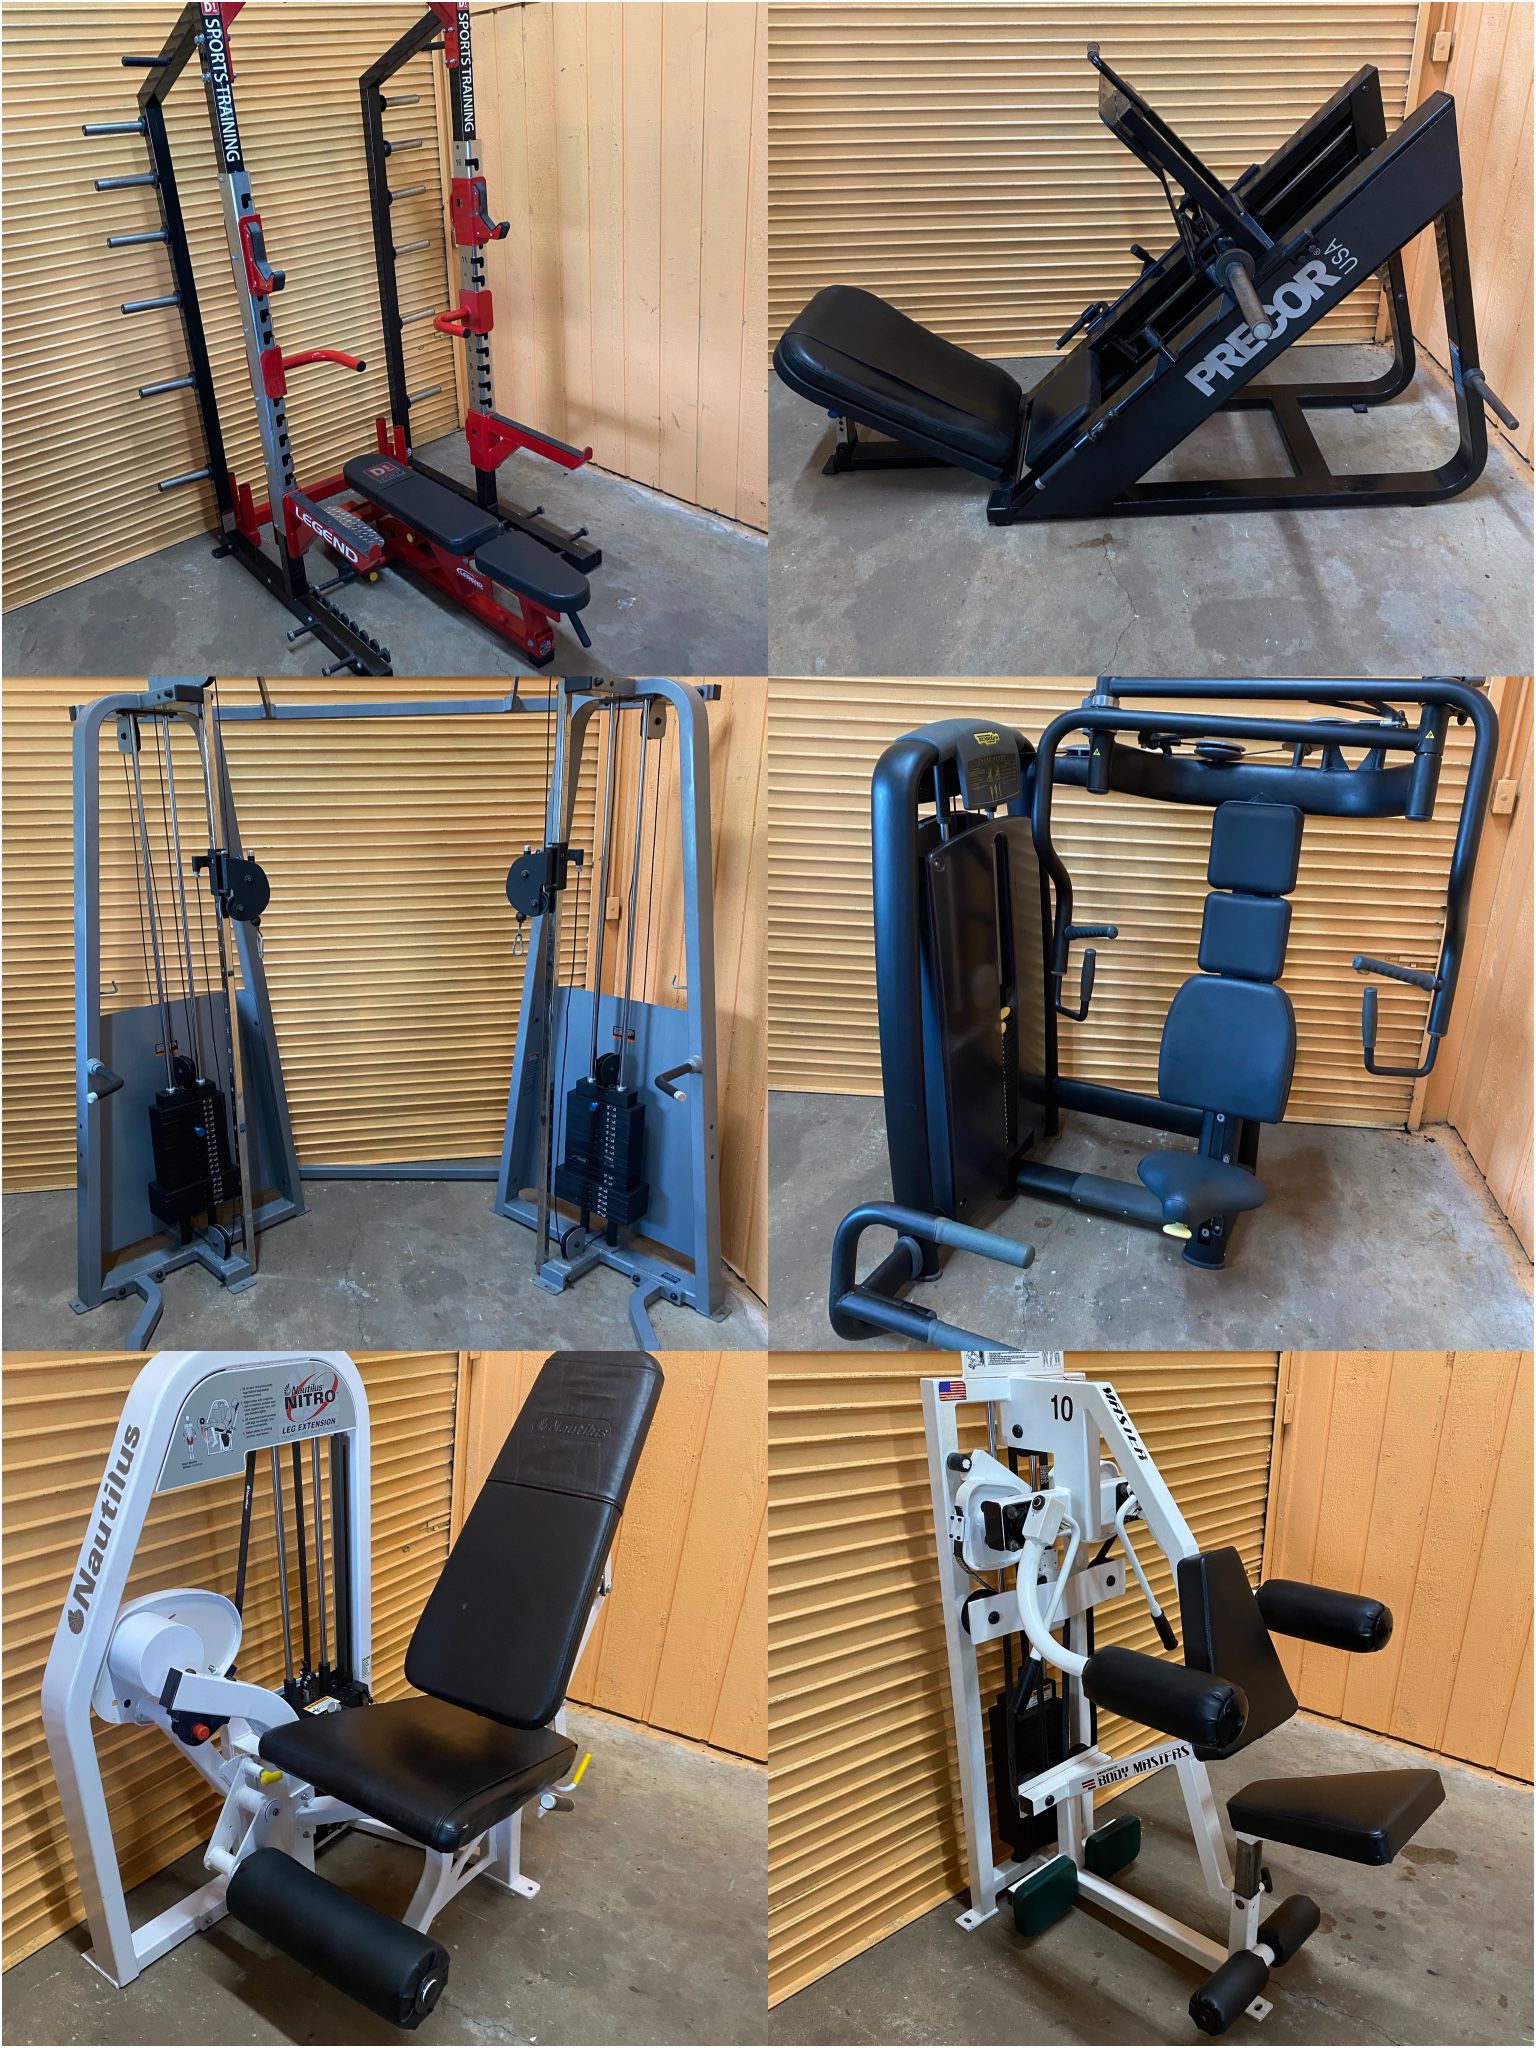 Tons Of Commercial Gym Equipment- Squat Rack, Leg Press, Weight Bench, Functional Trainer, Crossover, Hammer Strength, Cybex